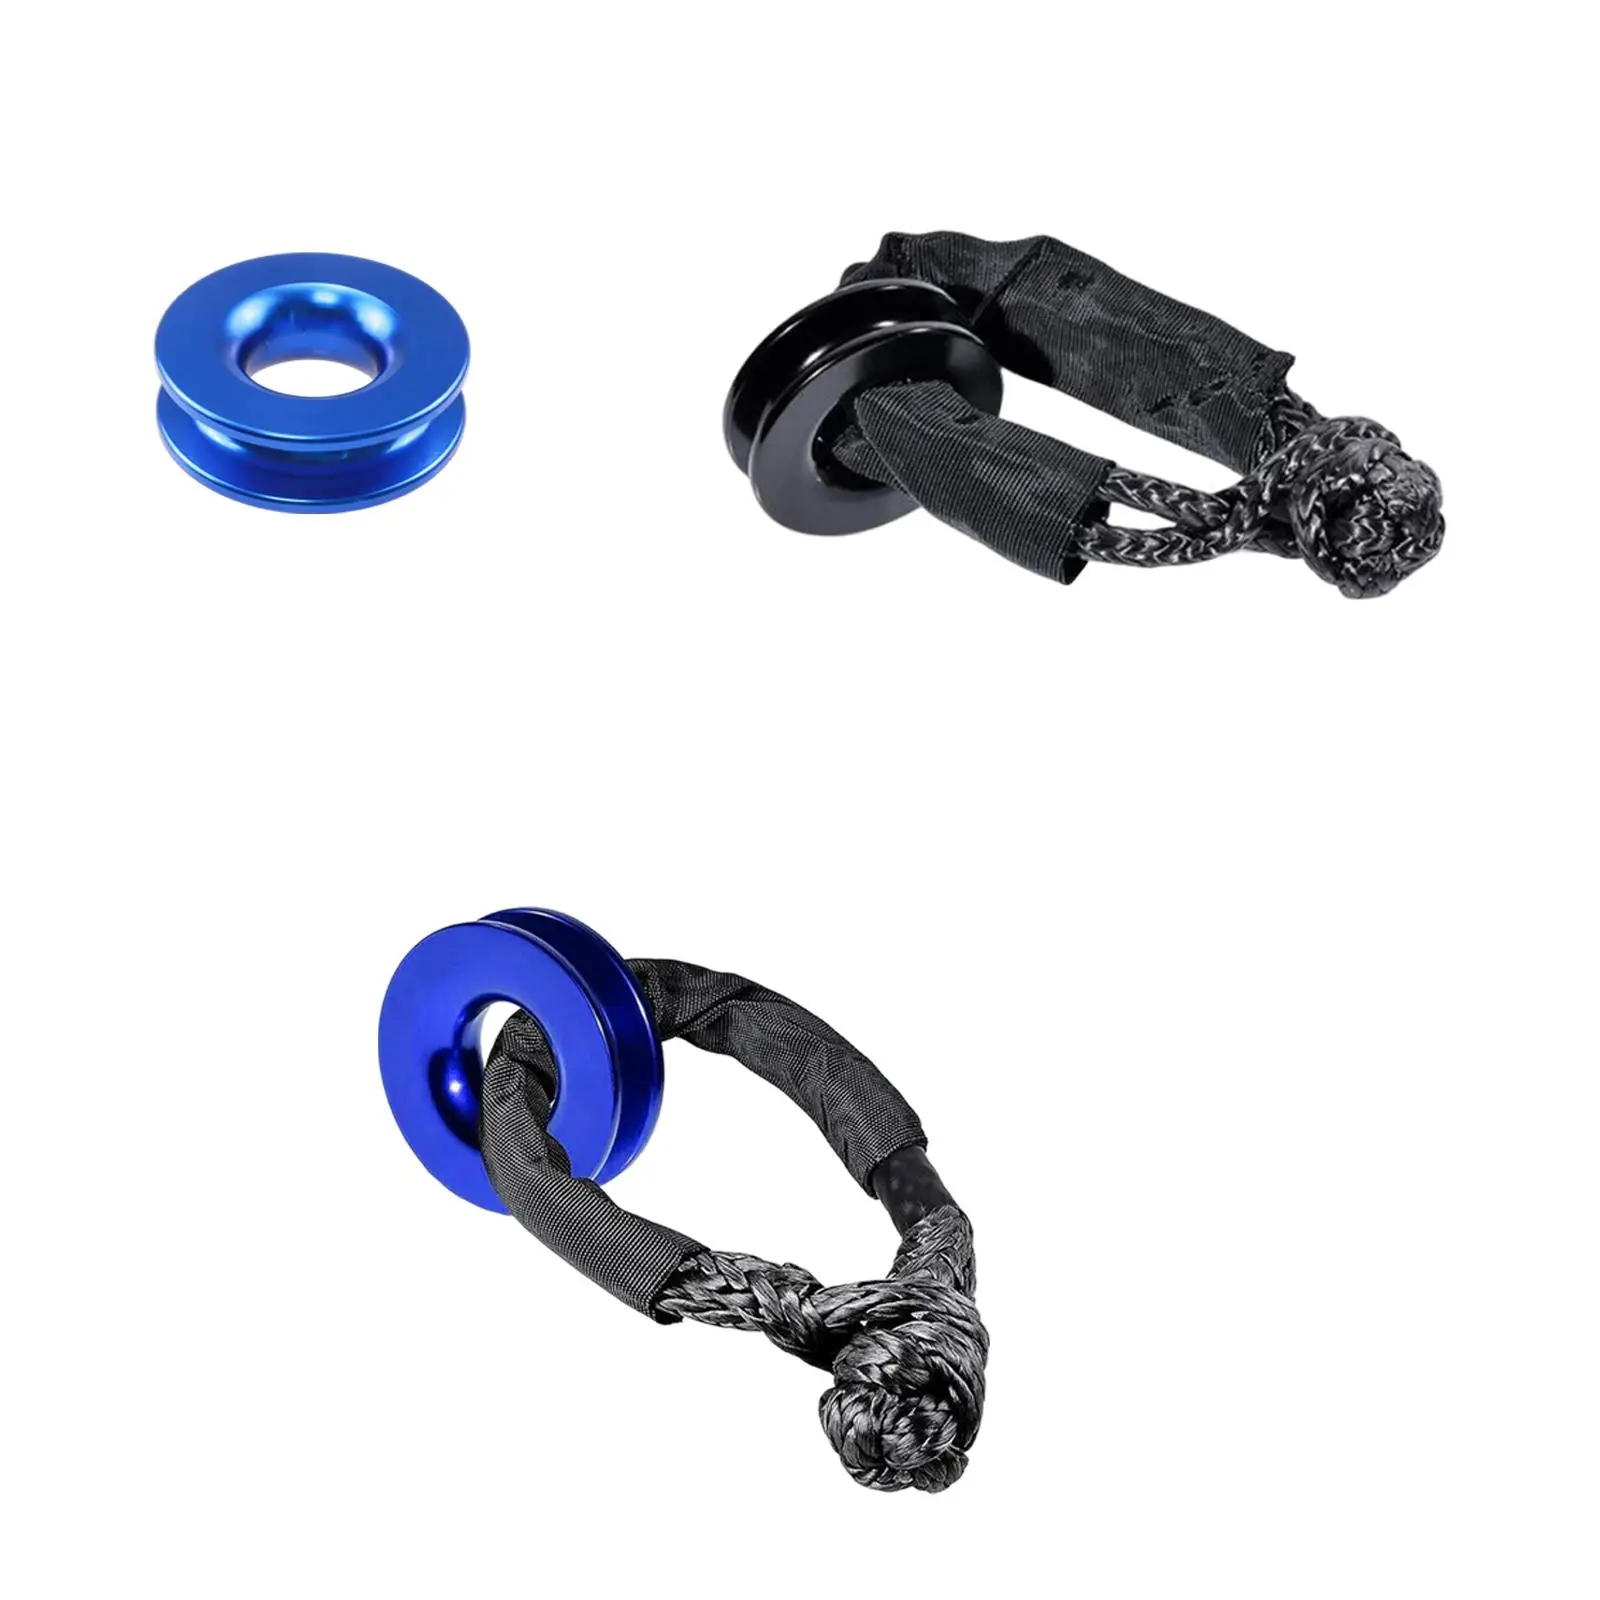 Recovery Durable Easy to Install for Soft Shackle ATV UTV SUV